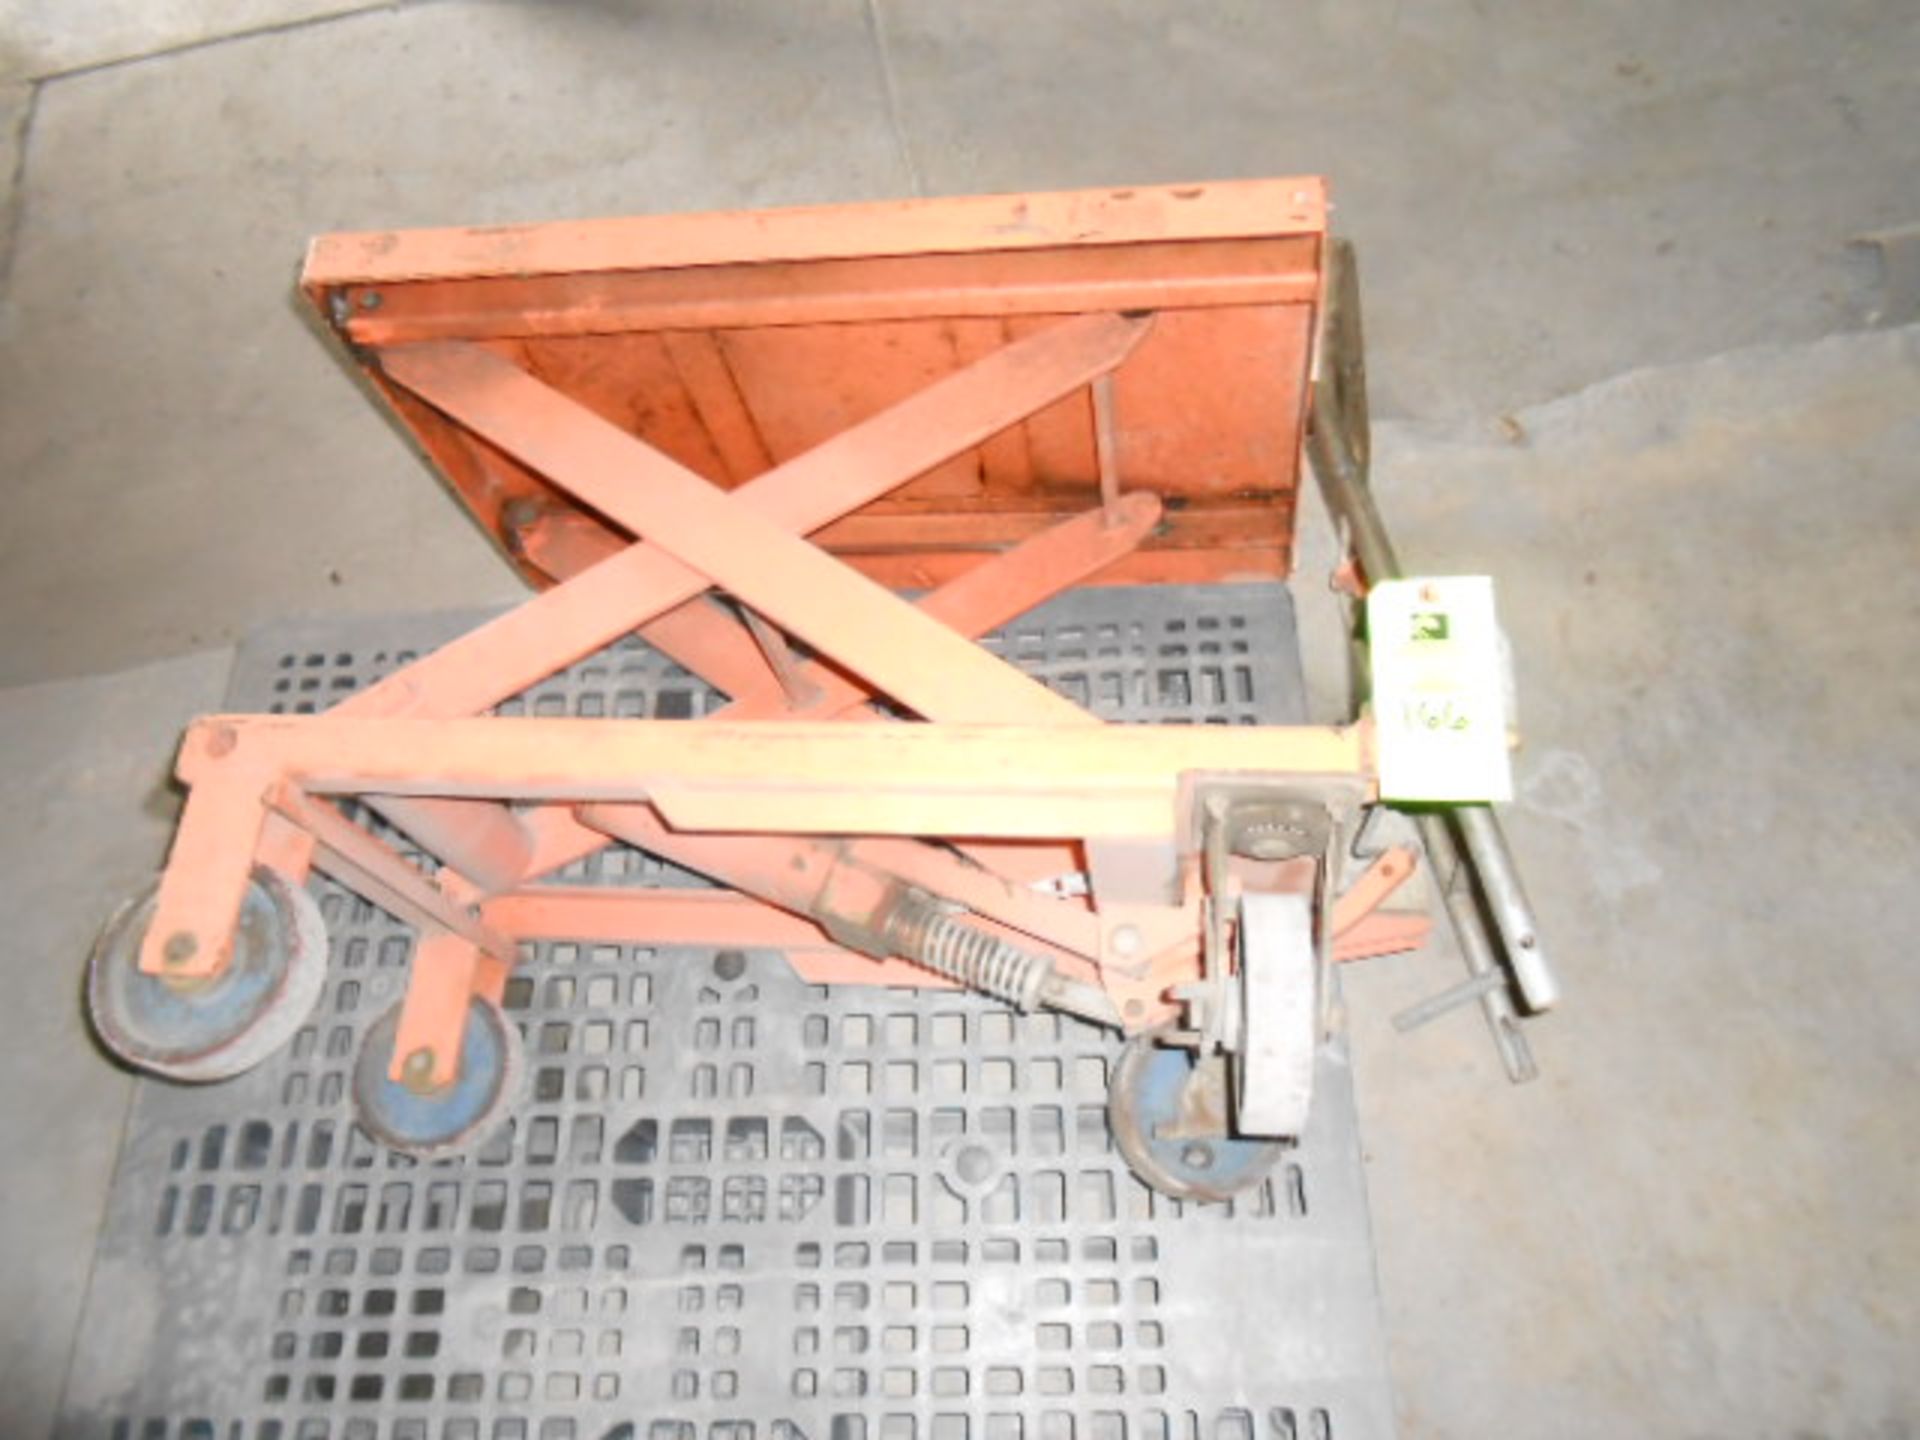 Hydraulic lift cart, 32 in x 20 in platform __LOCATED: ON-SITE WAREHOUSE, MAIN ROLL-UP DOOR